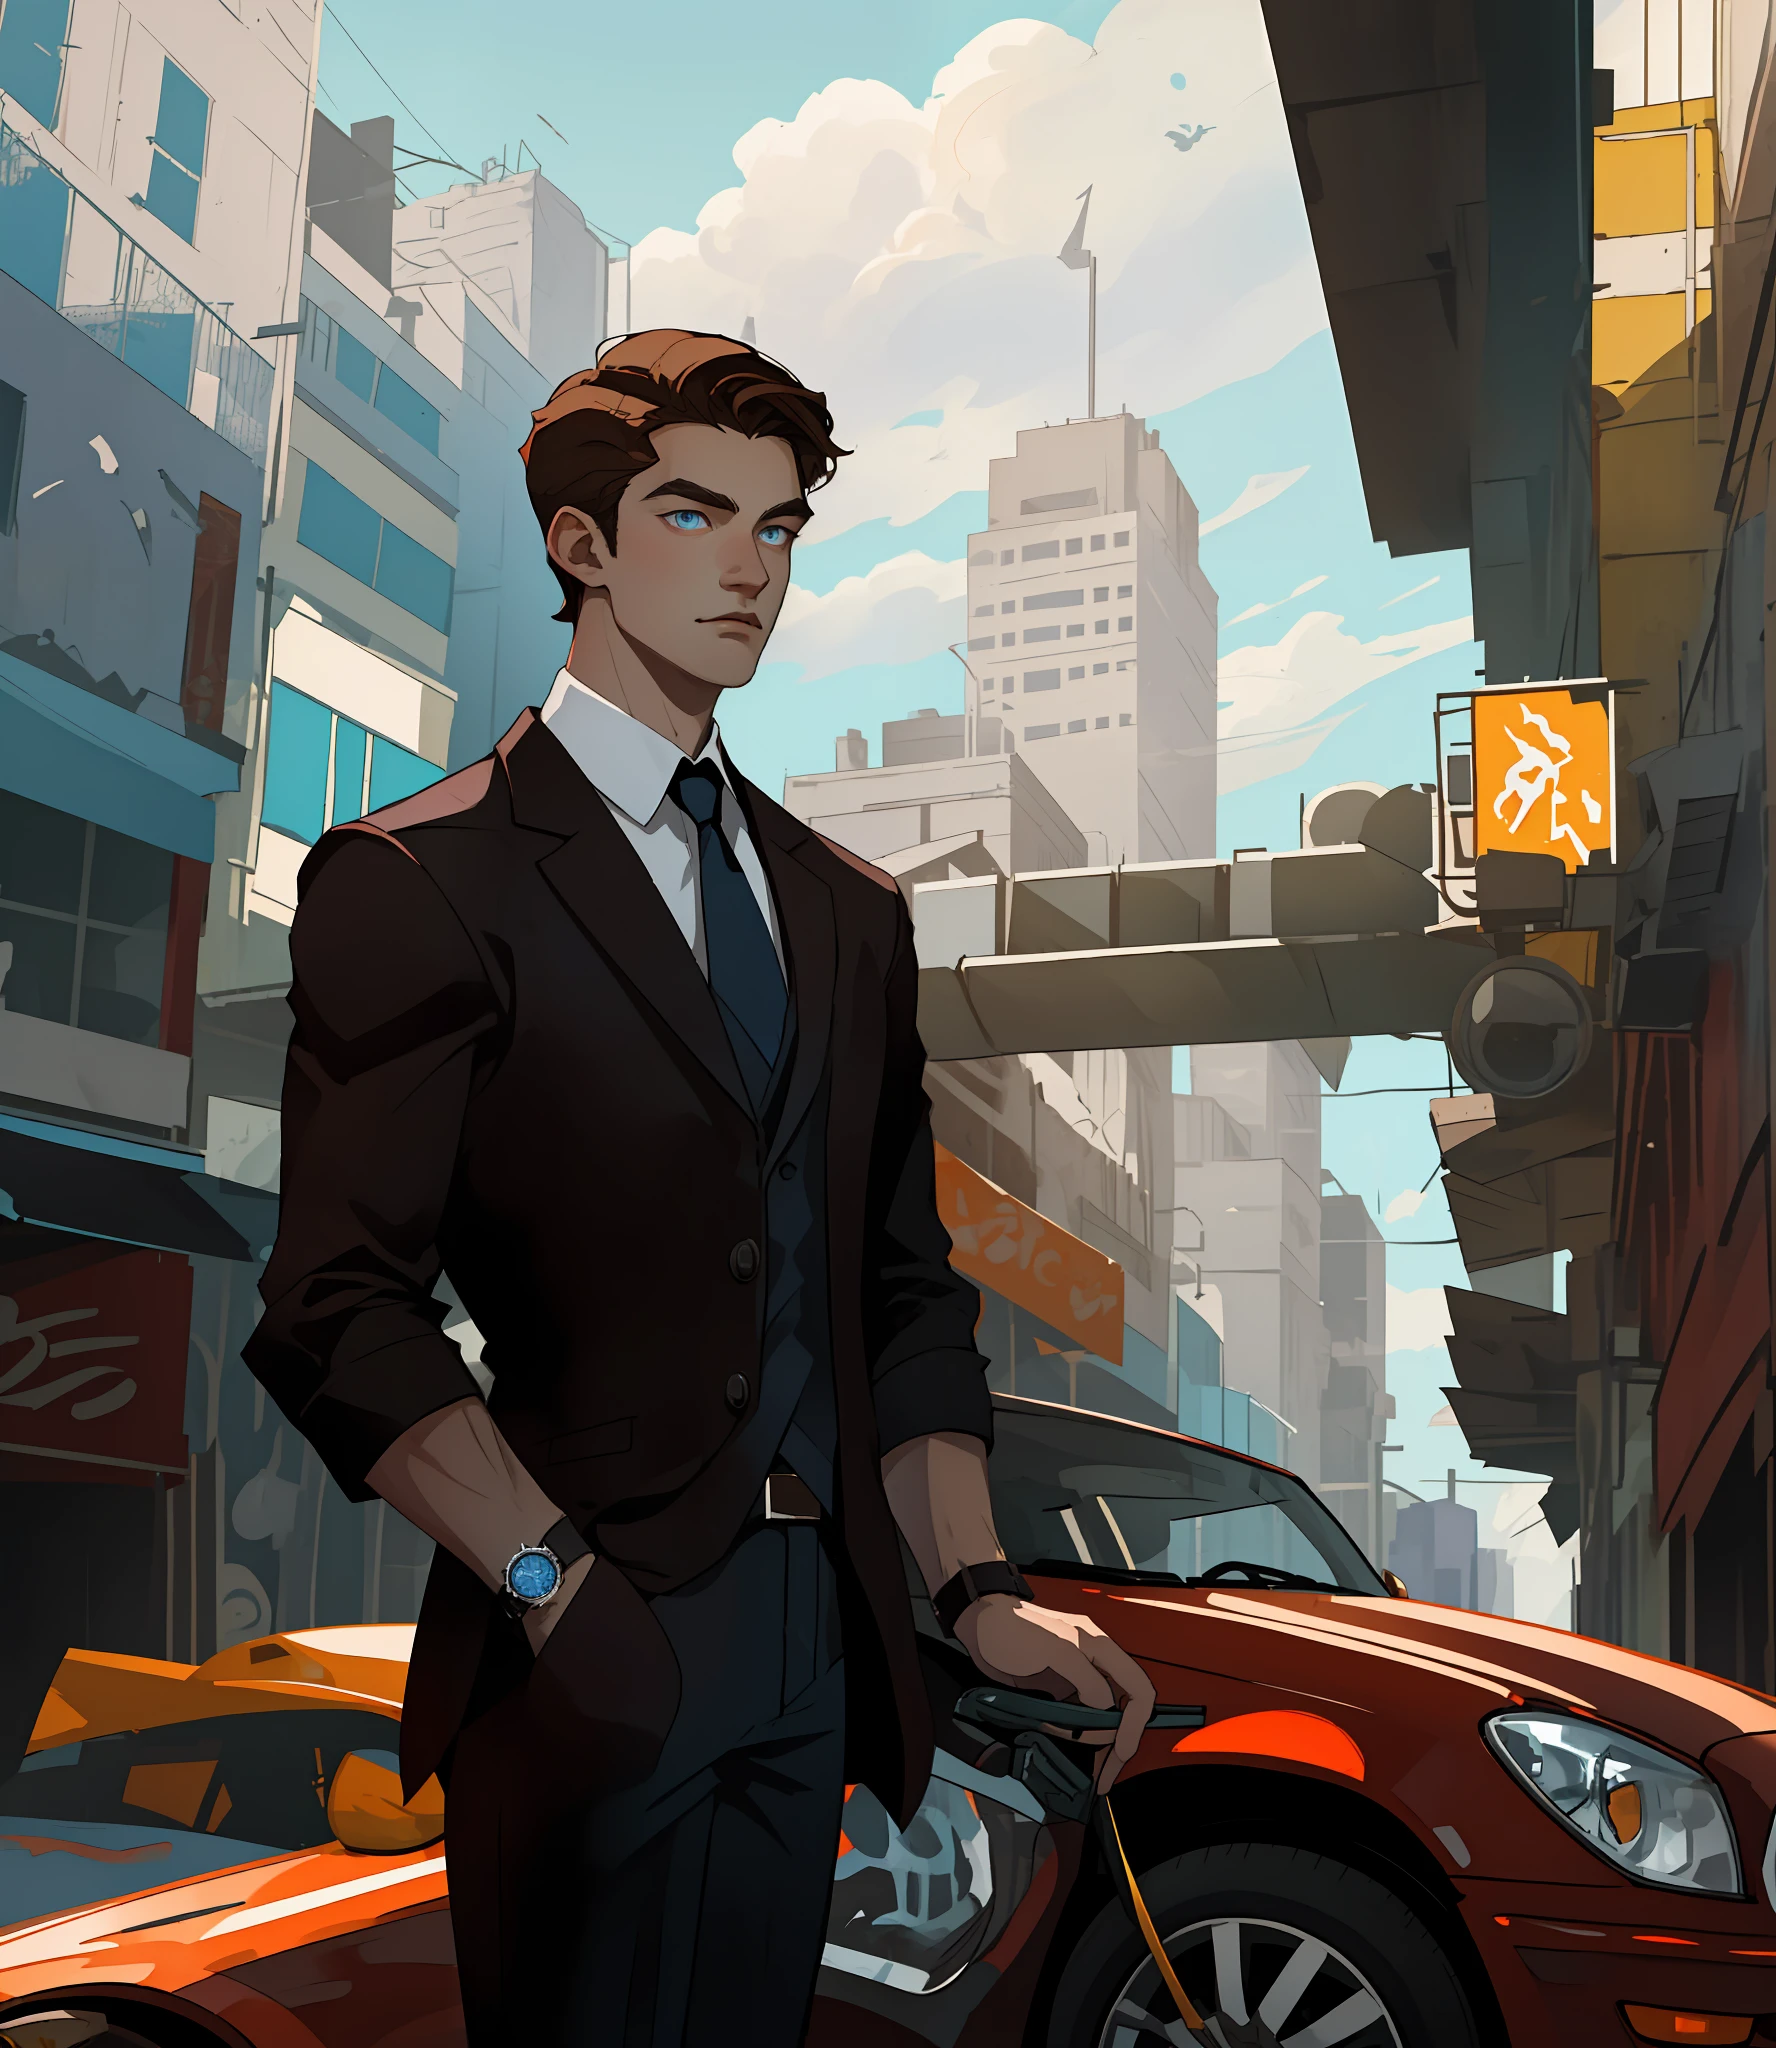 A young man, 20 years old, a Man, male Character, 1boy, slender, brown hair, blue eyes, looking at his watch, waiting, on a sunny day, city, metal steel building, pole, car in the distance, hdr: 1.25, intricate details: 1.14, filmic: 0.55